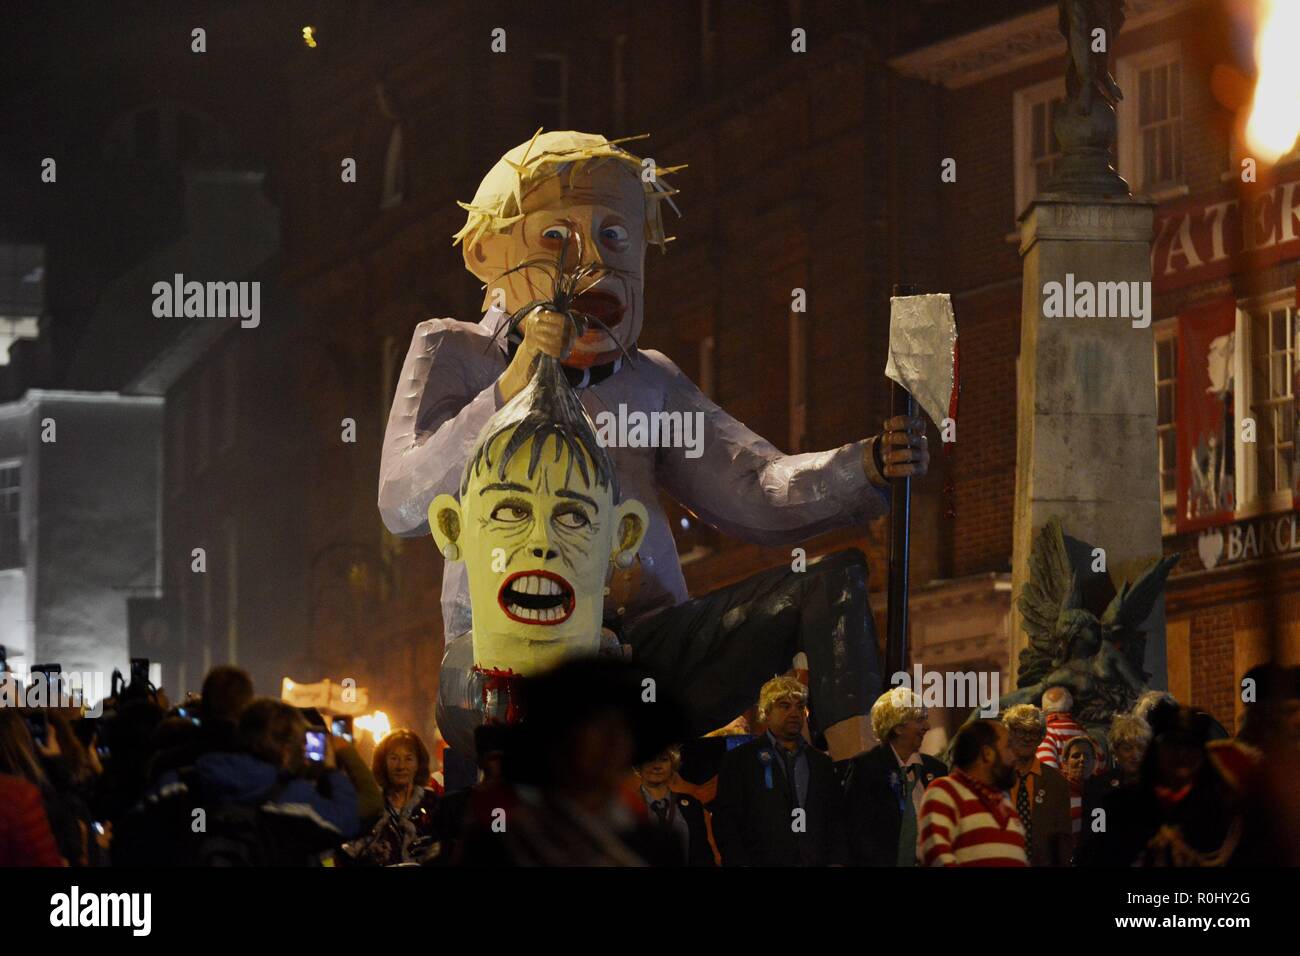 Lewes, East Sussex, UK. 5th November 2018. Boris Johnson effigy pulled through the streets of Lewes, East Sussex during the towns famous Bonfire celebrations ©️Peter Cripps/Alamy Live News Stock Photo